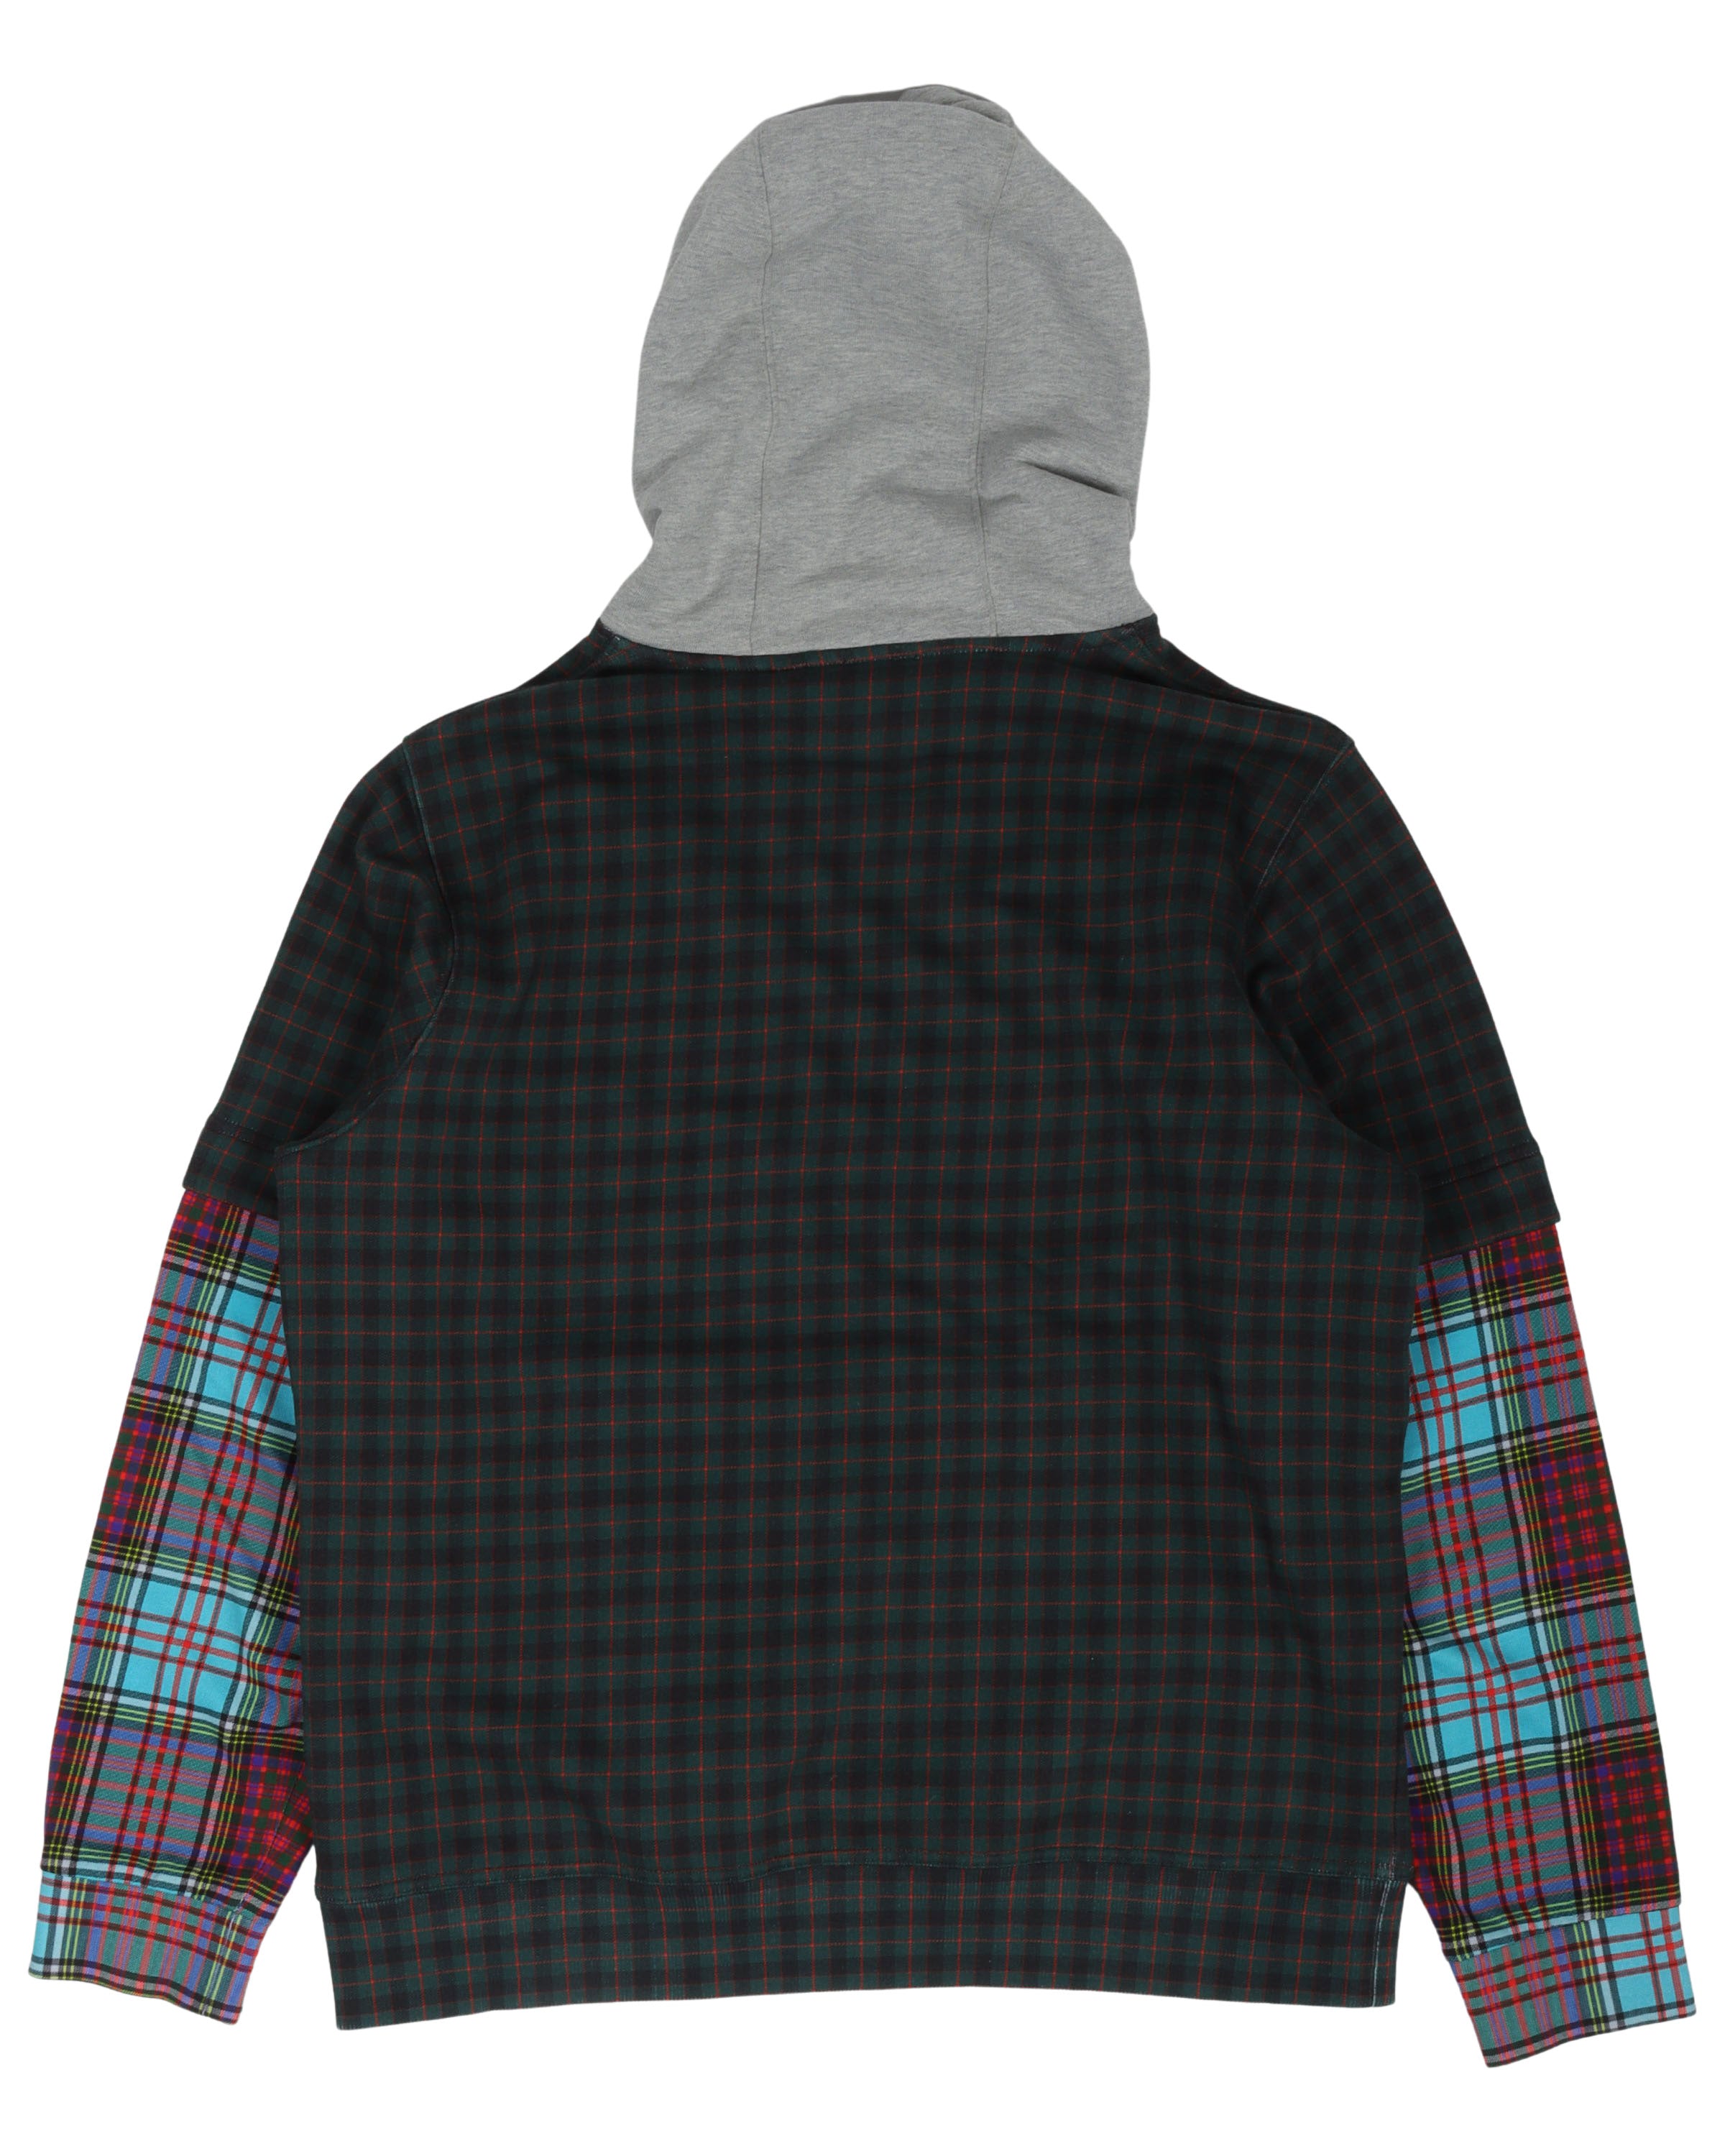 Multi-Patched Hoodie